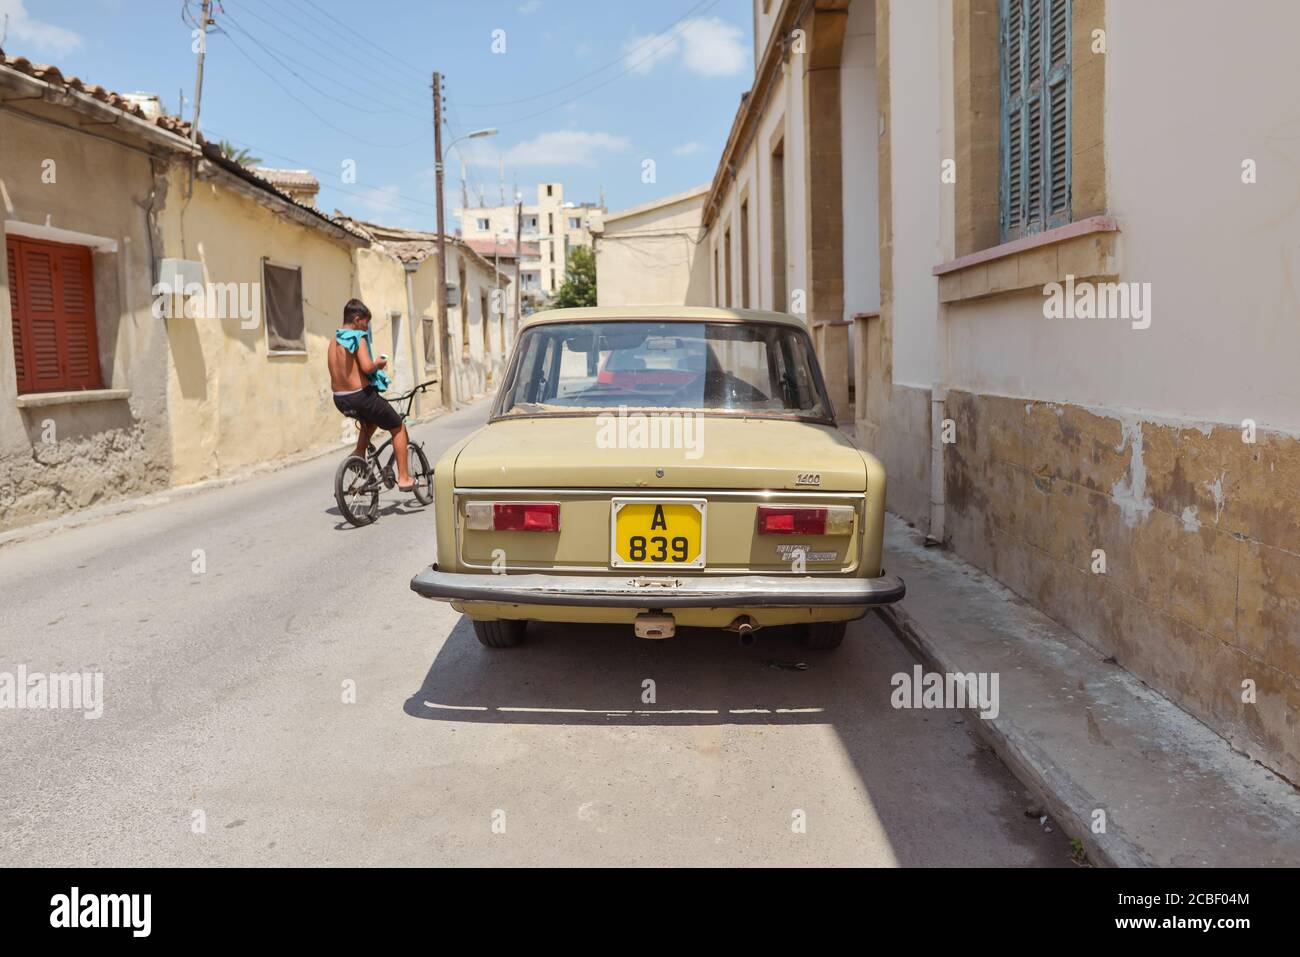 Nicosia / Northern Cyprus - August 15, 2019: boy riding a bicycle next to old vehicle on the Turkish side of Nicosia belonging to North Cyprus Stock Photo